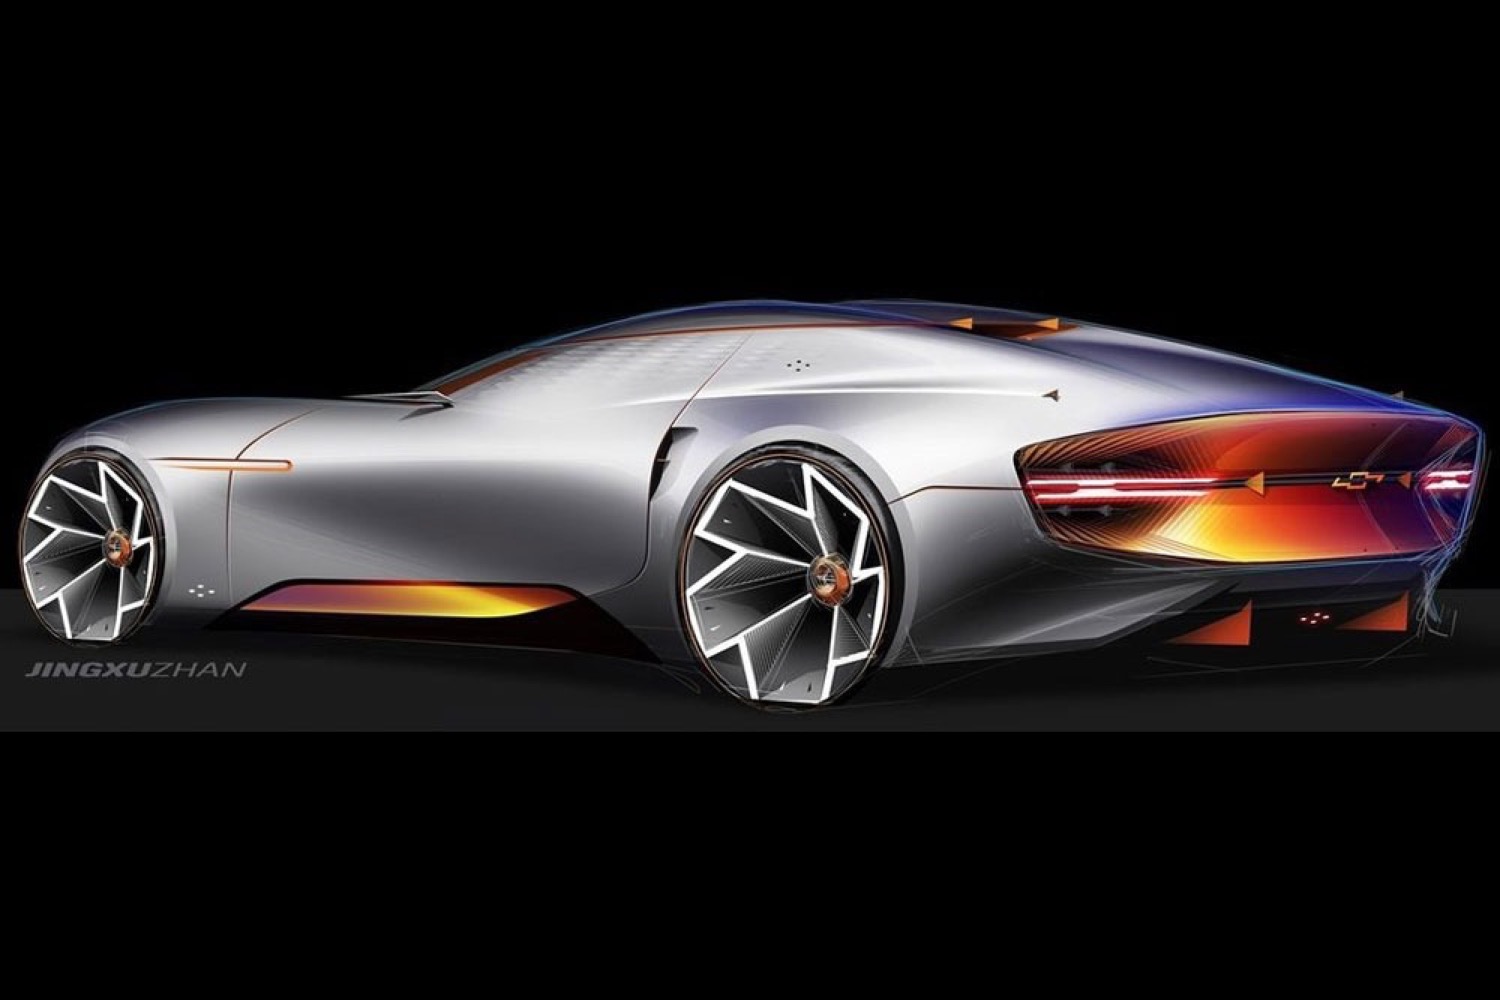 Gm Design Shows Off Futuristic Chevy Sports Car Sketches Gm Authority